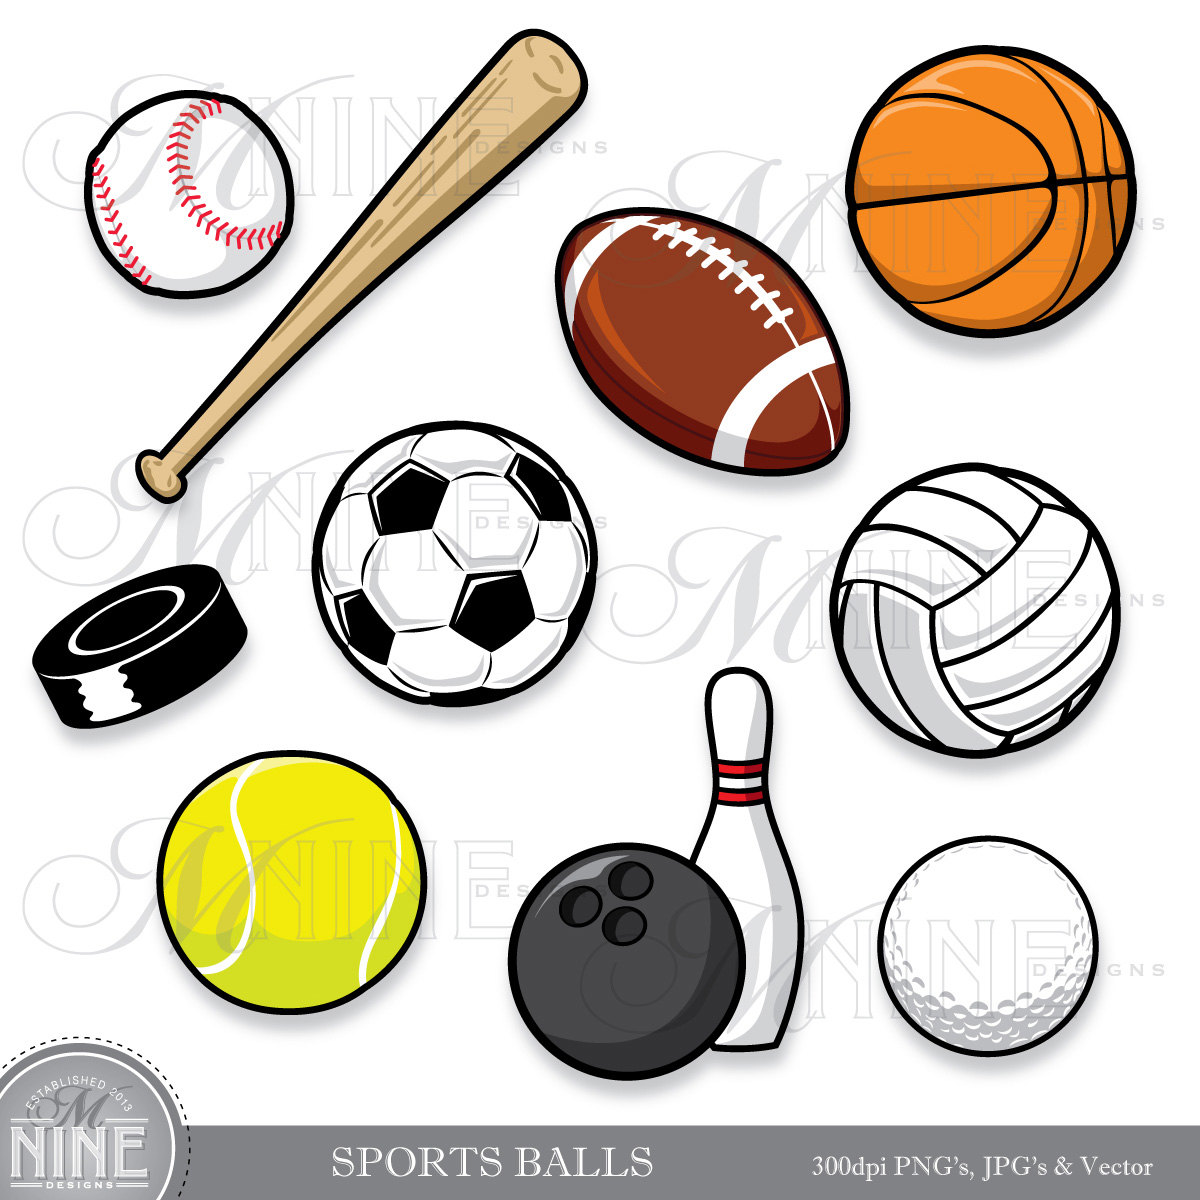 Free sports images clip art